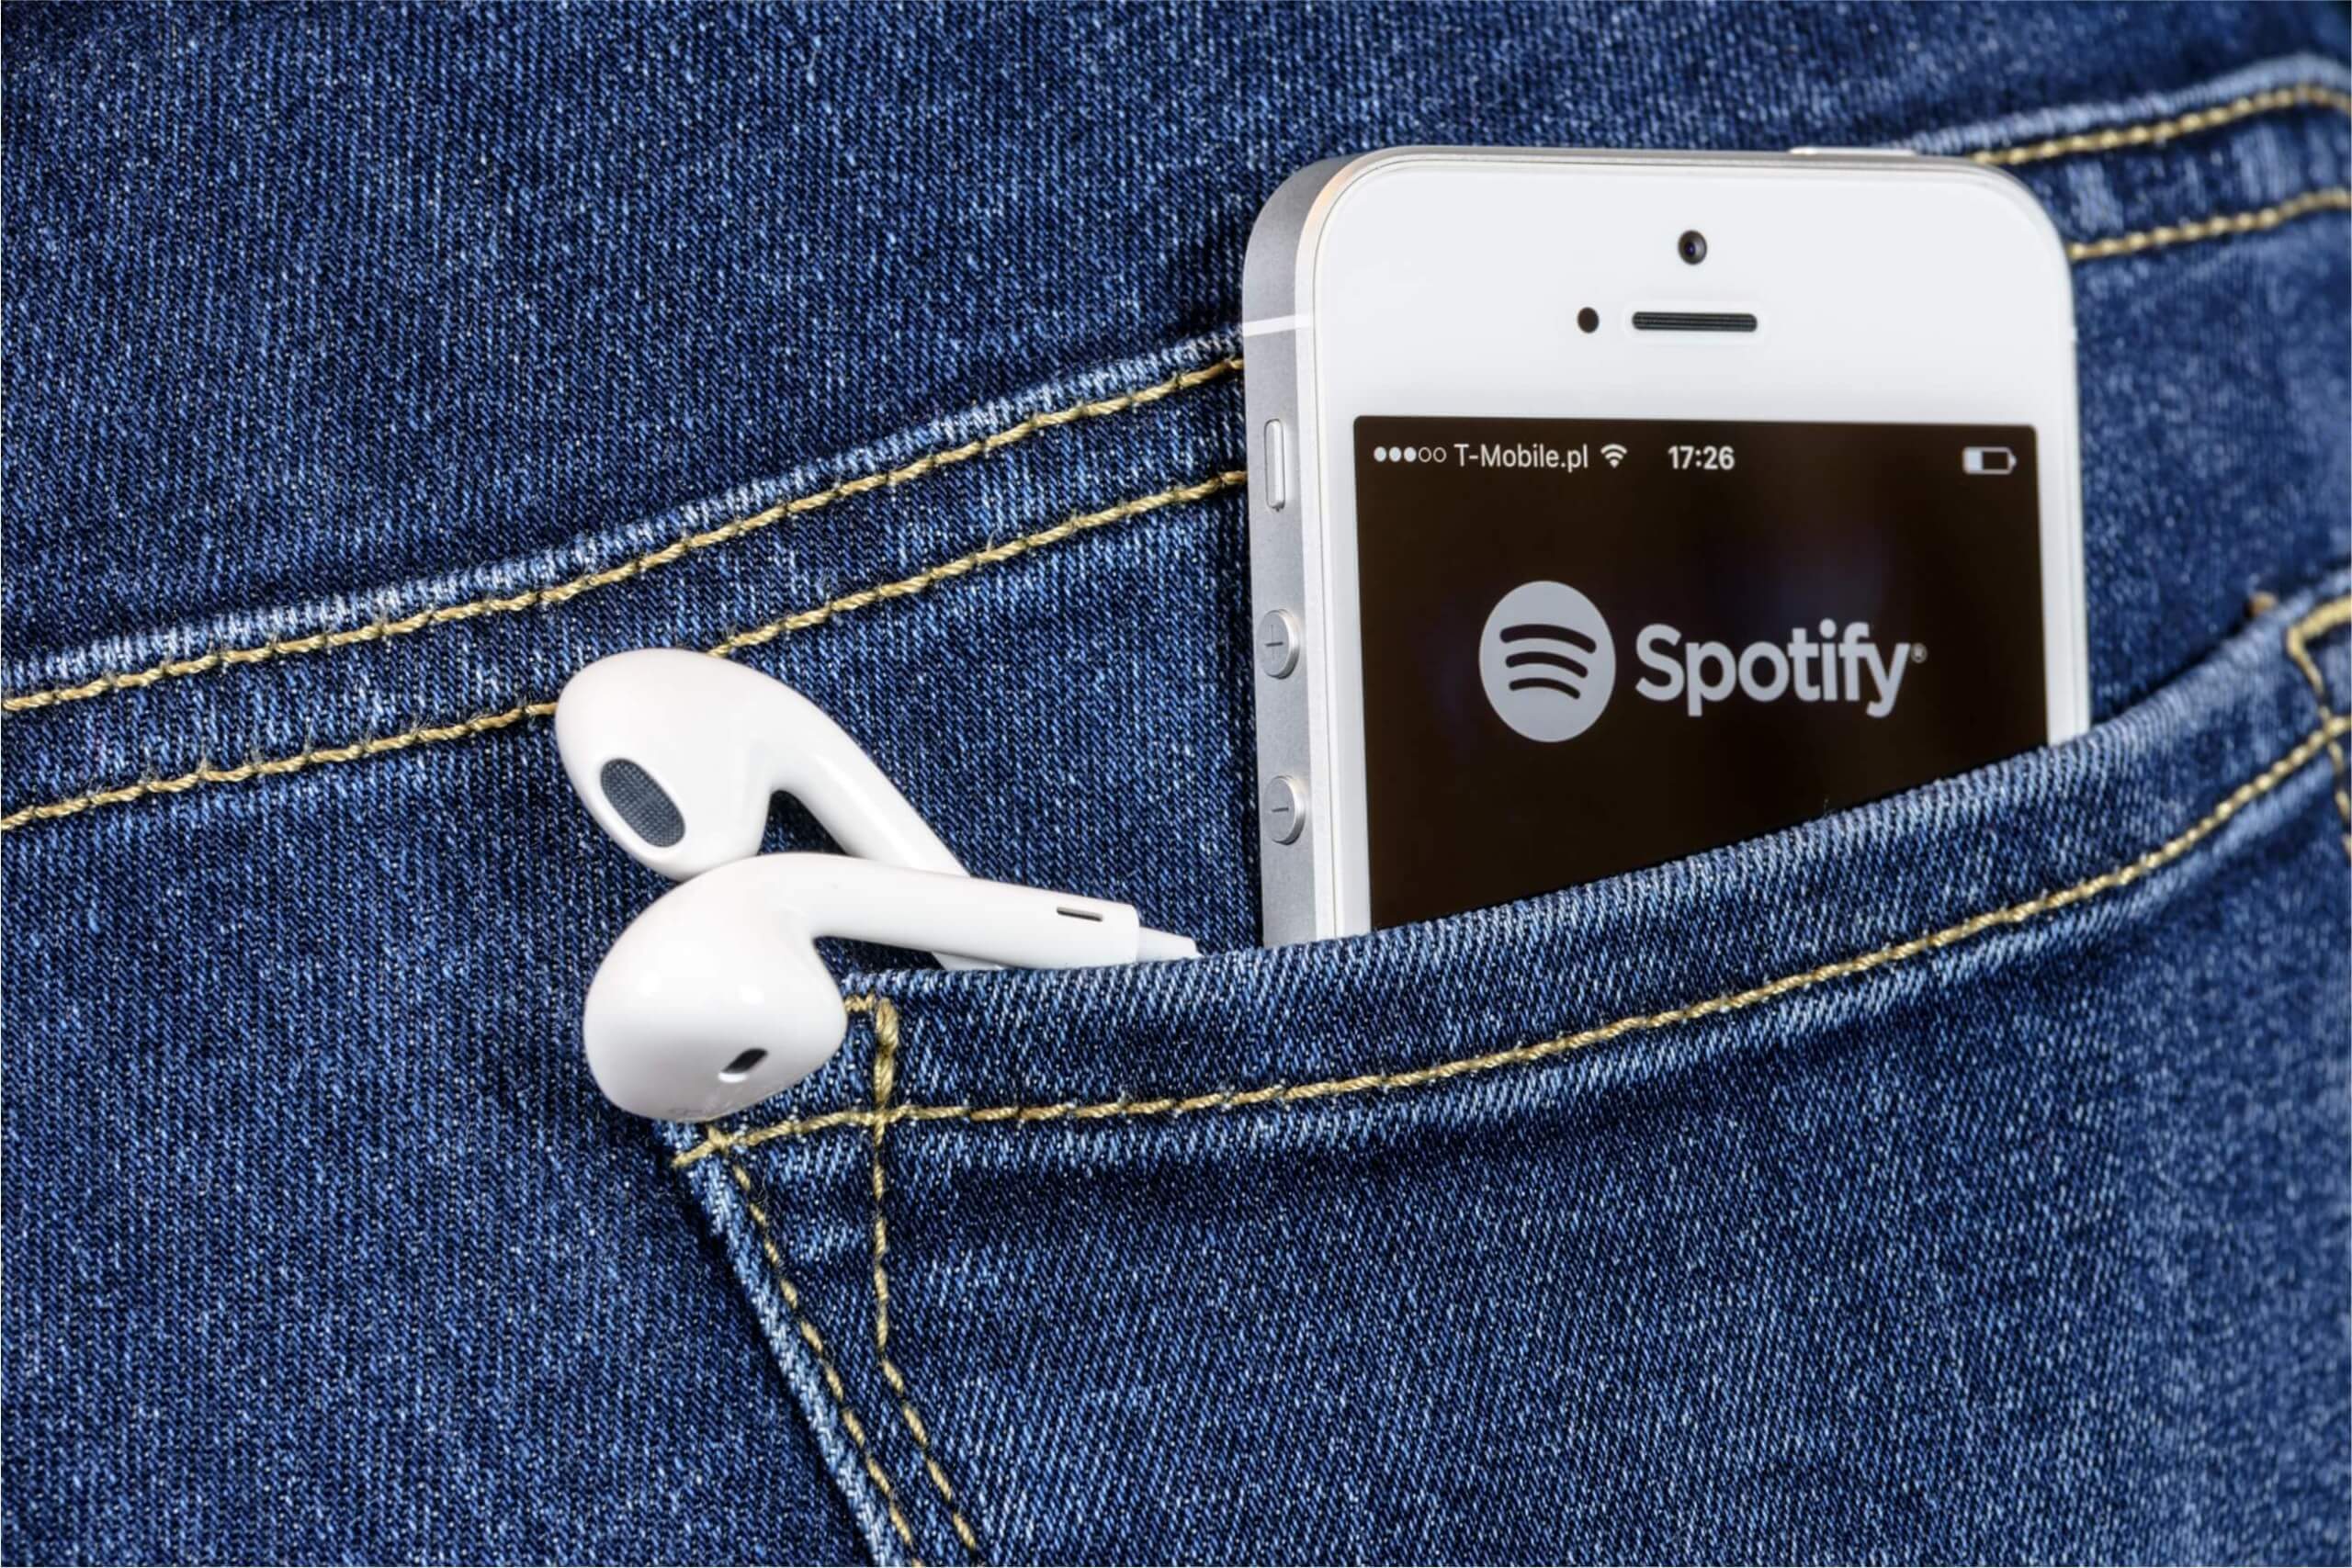 Spotify is allowing marketers to target listeners based on podcast preferences